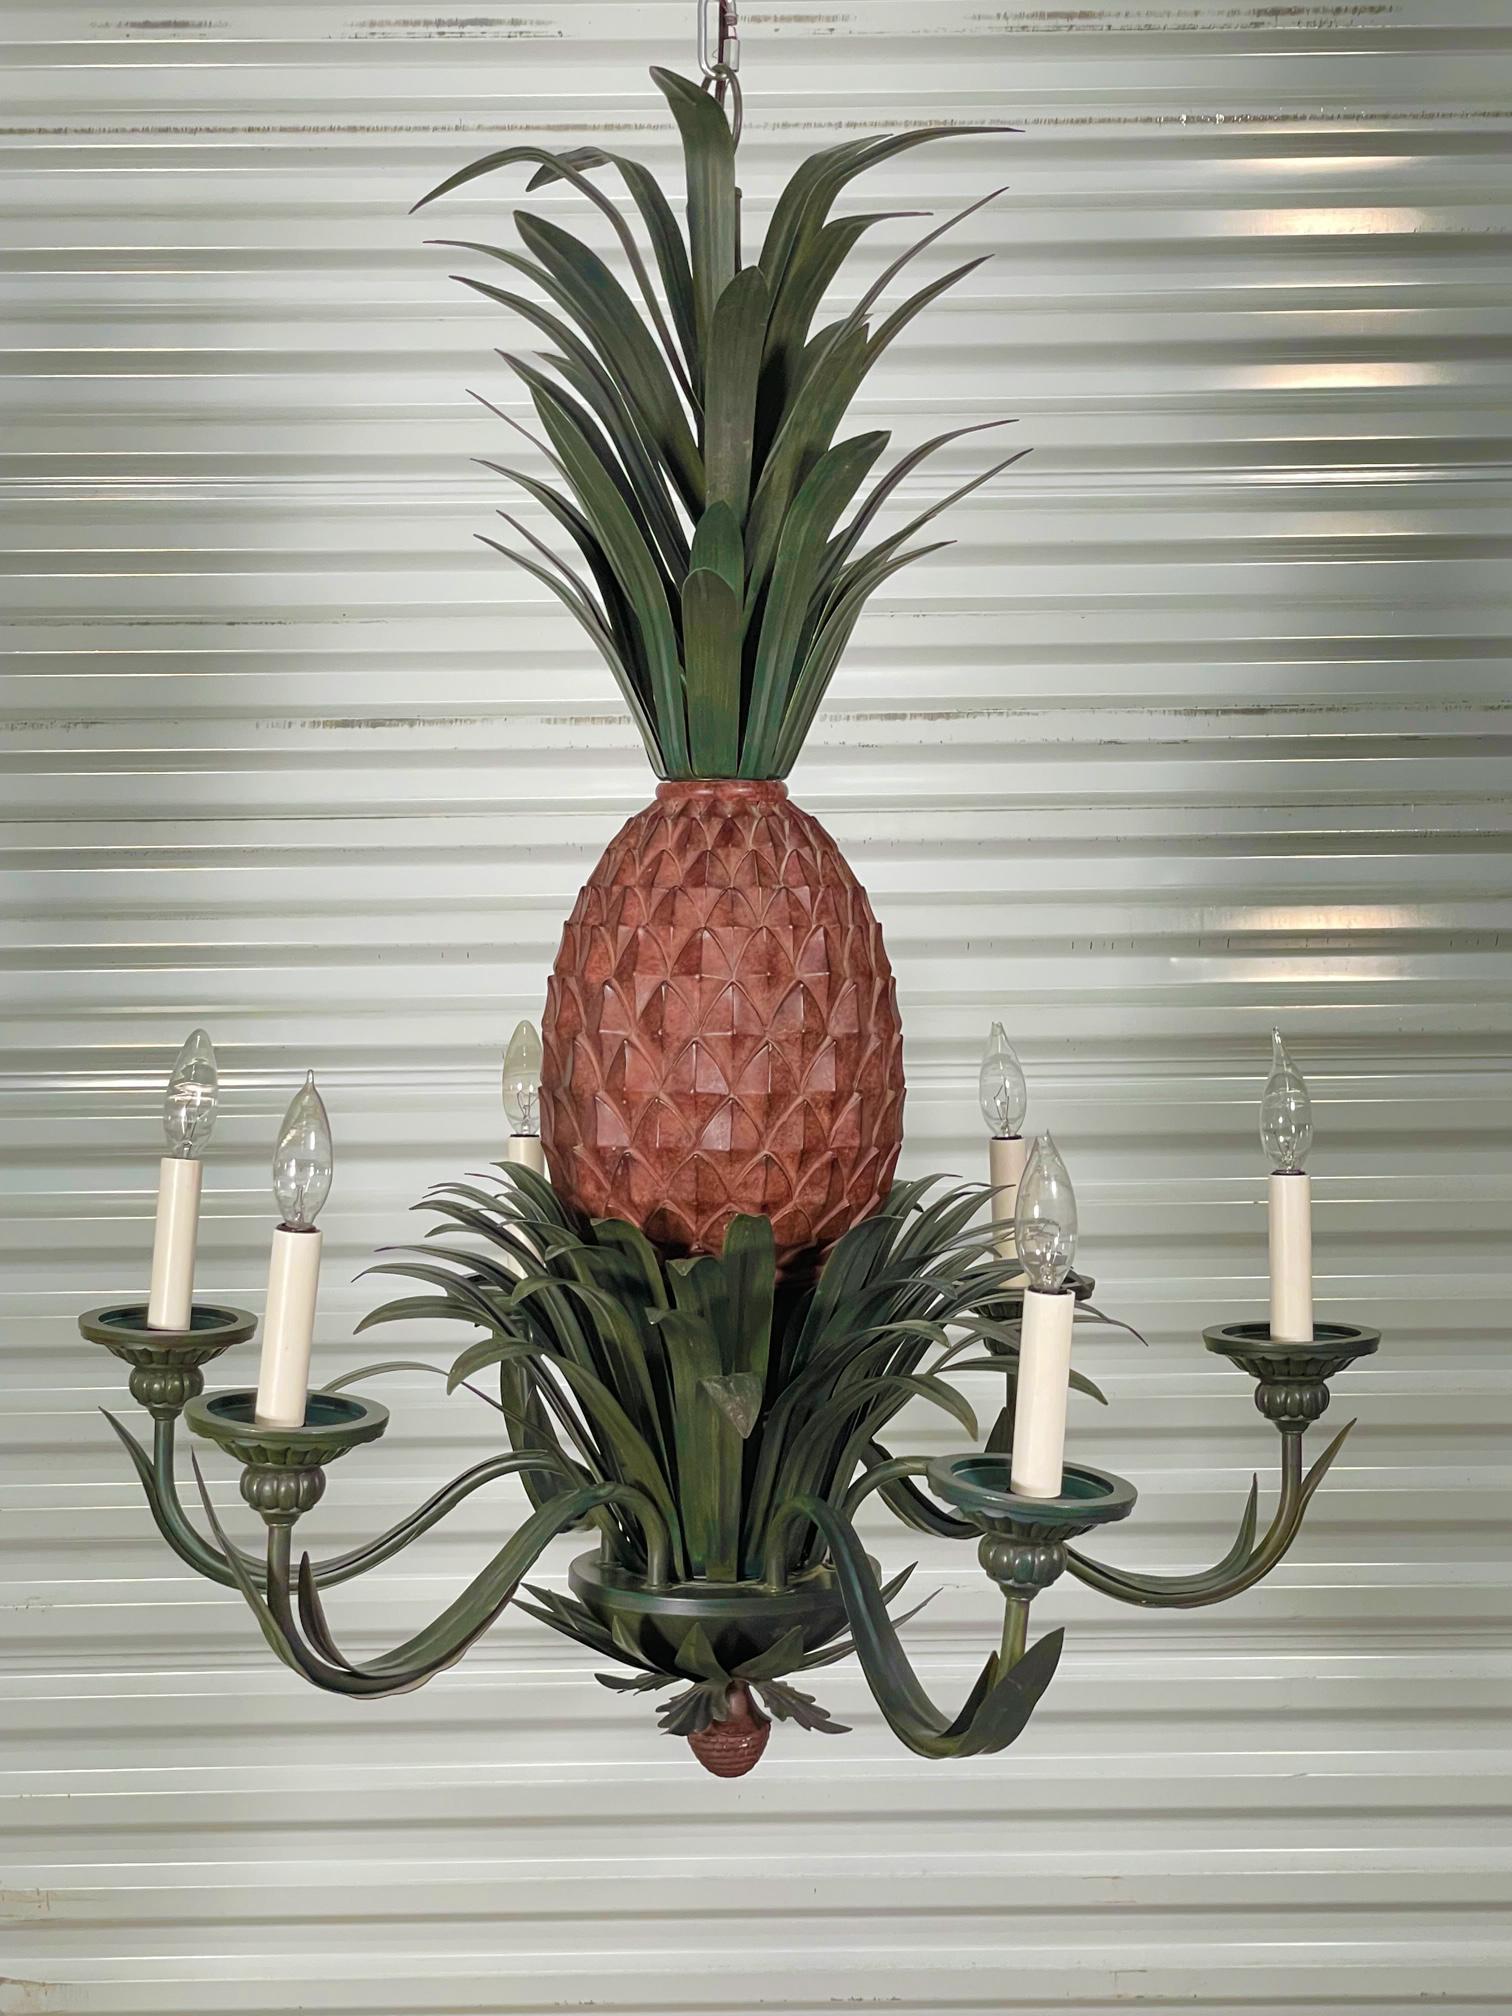 Large 6-arm chandelier features a sculptural pineapple center with tole metal fronds above and below. Good condition with imperfections consistent with age, see photos for condition details. We have two of these in stock, inquire if interested.
For